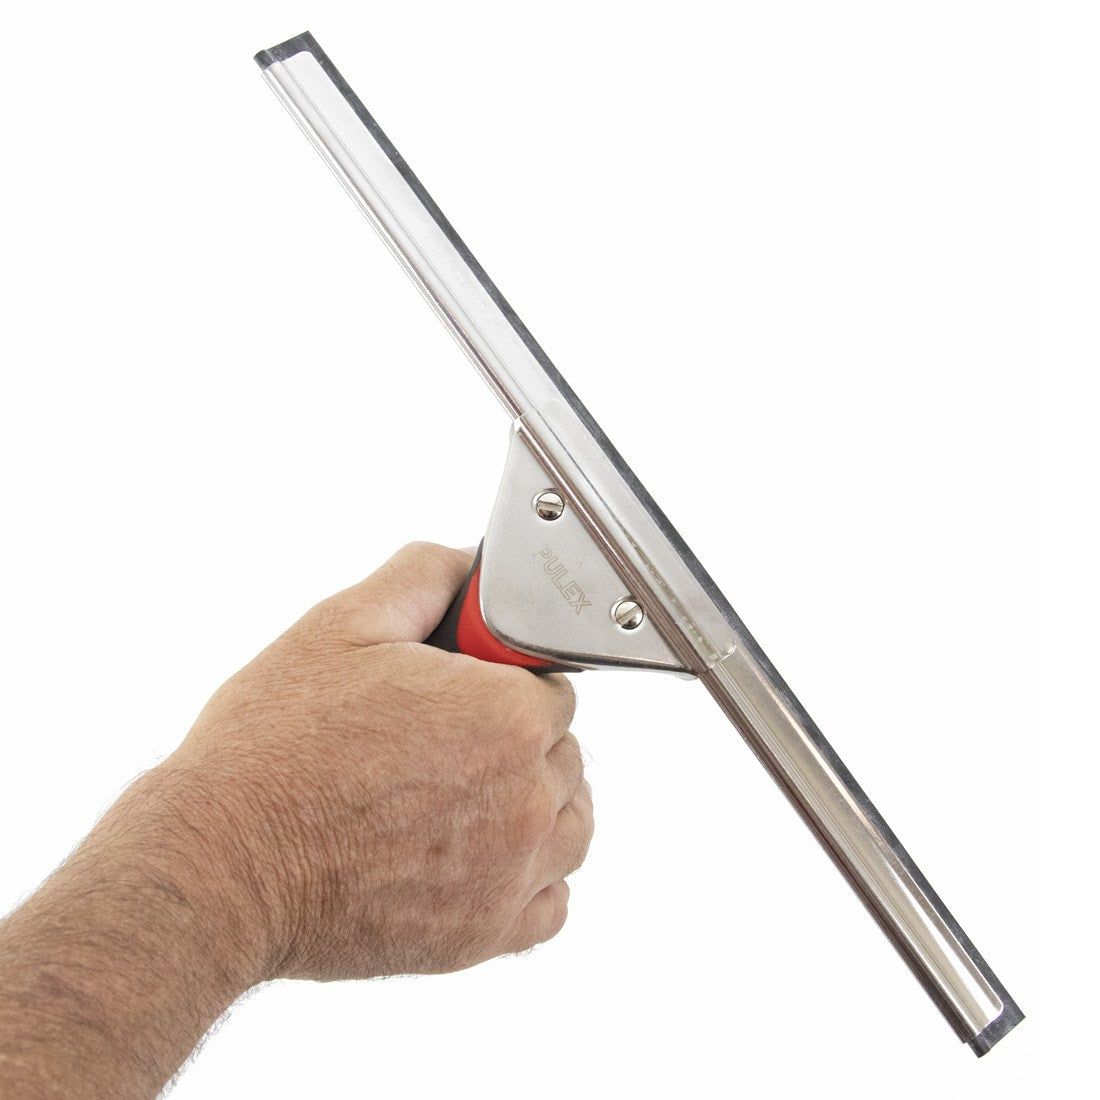 Pulex Complete TechnoLite Squeegee, Complete Squeegees